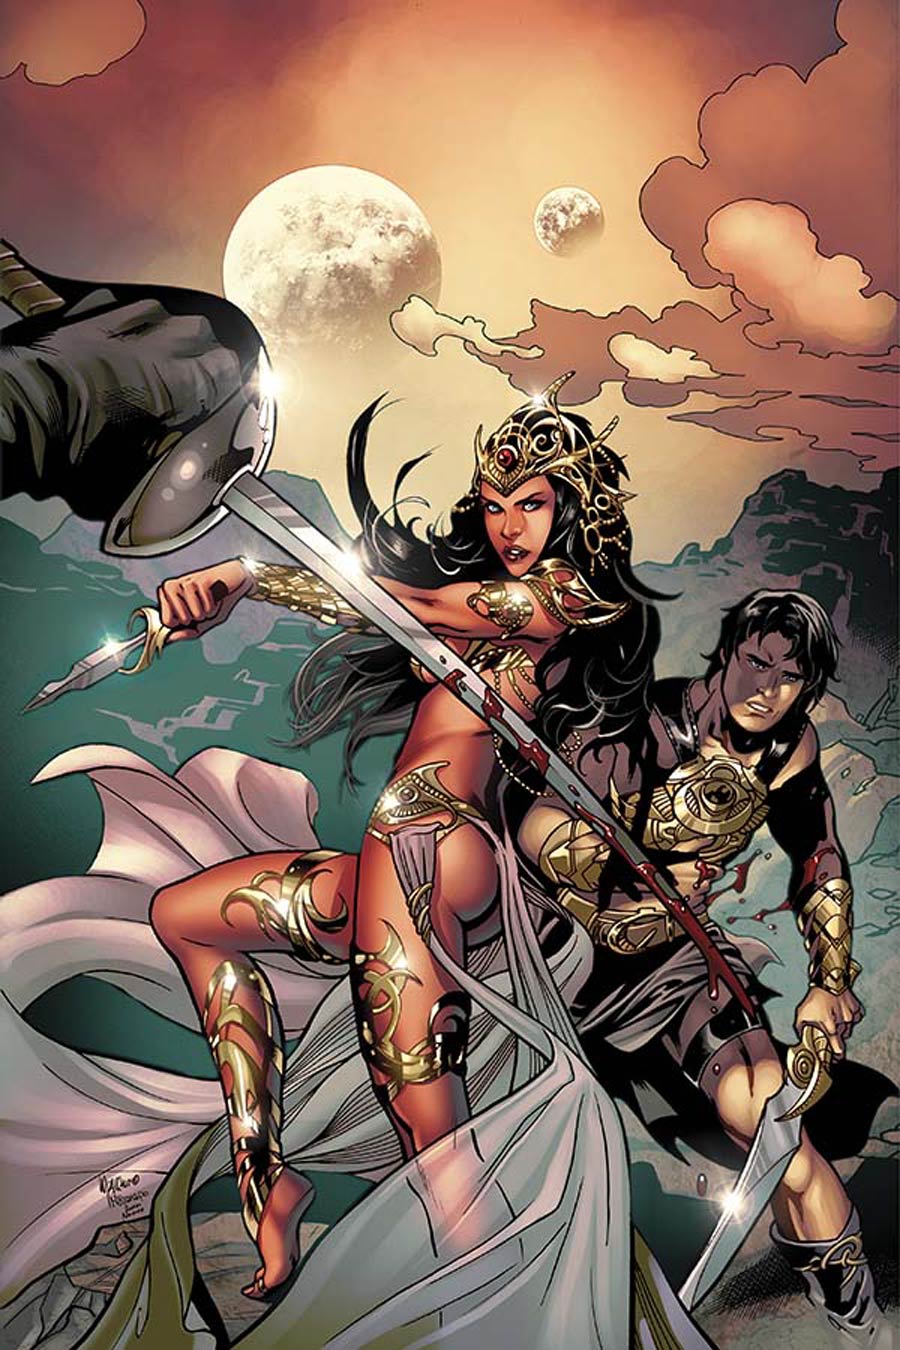 John Carter Warlord Of Mars Vol 2 #6 Cover G Incentive Emanuela Lupacchino Virgin Cover